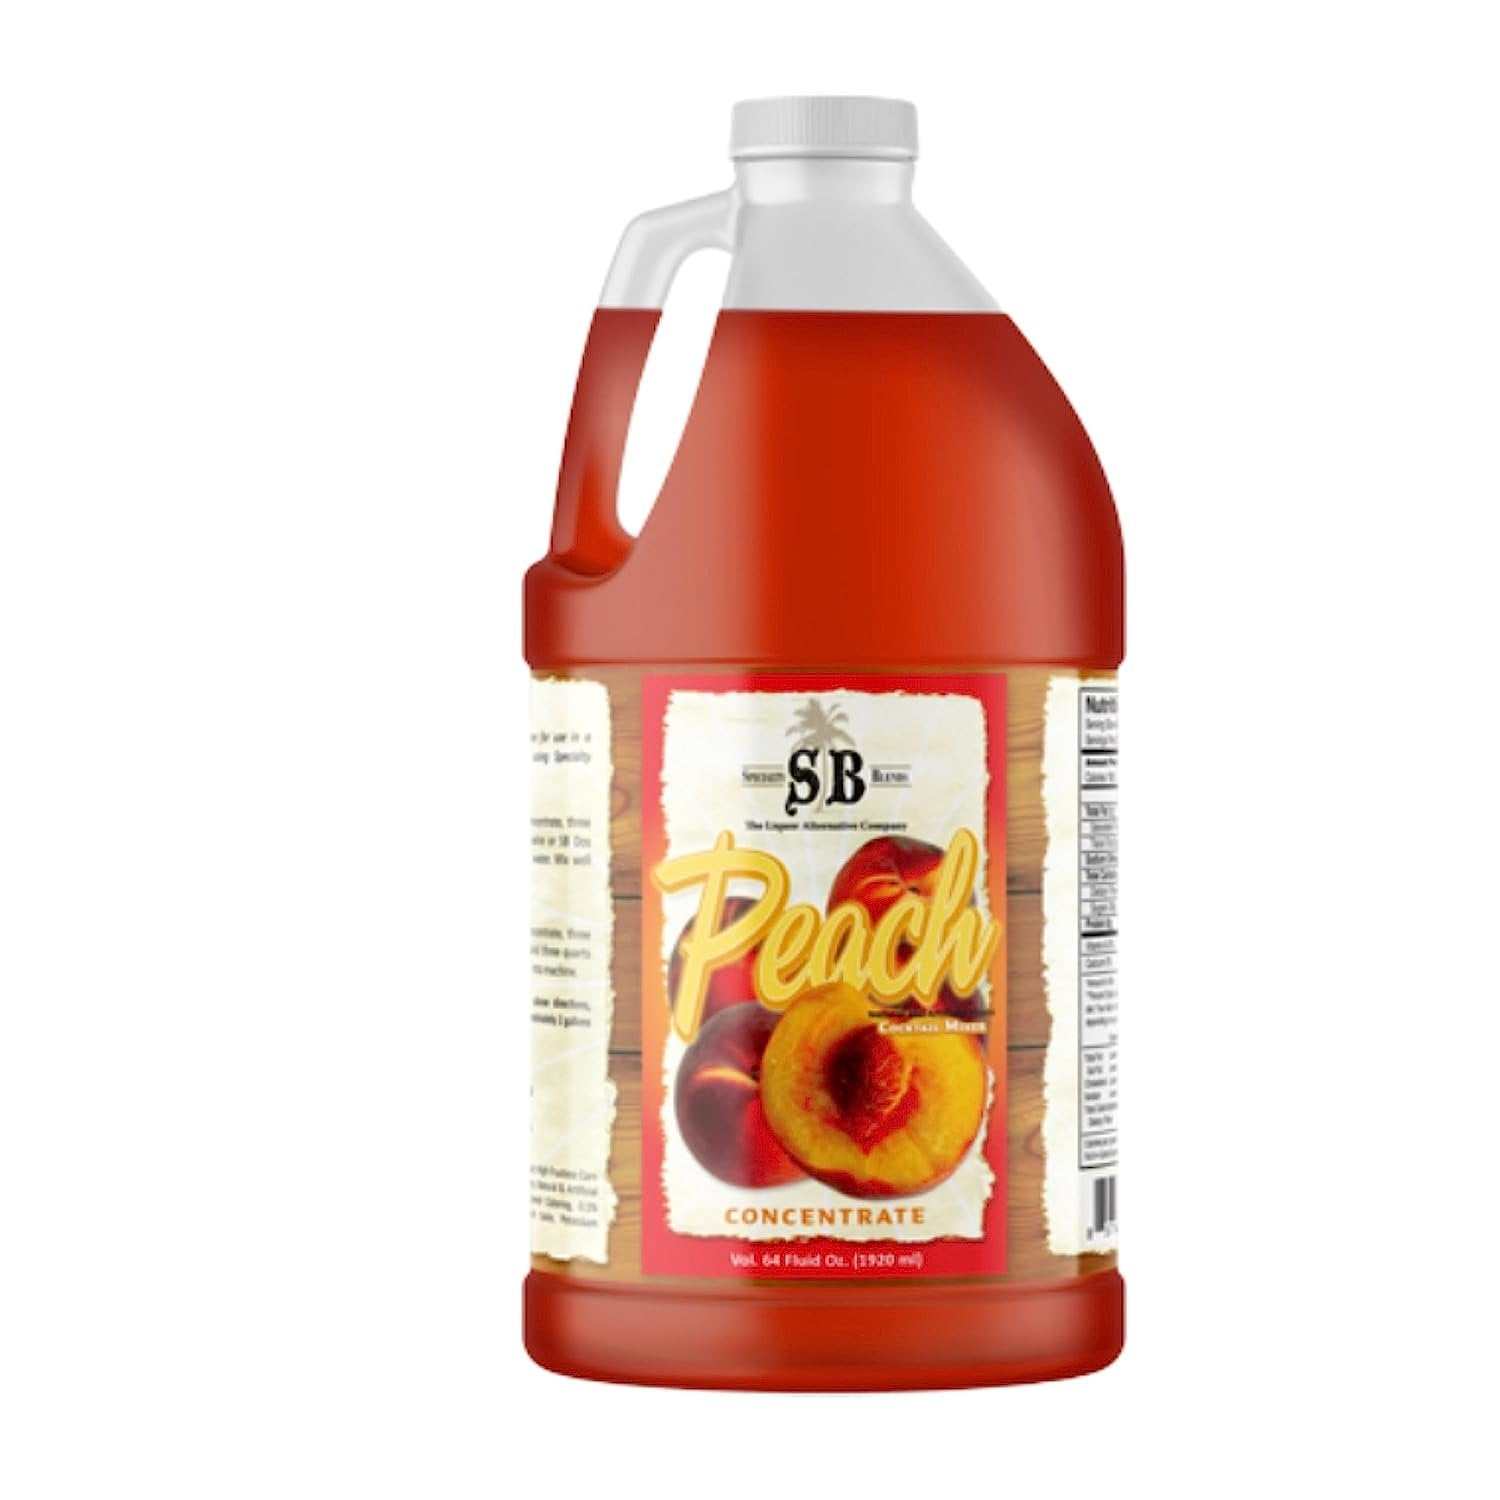 Specialty Blends Peach Flavored Syrup Cocktail Mixer Concentrate, Made with Organic Peach Flavor Syrups For Drinks, 1/2 Gallon (Pack of 1) - with Bonus Worldwide Nutrition Multi Purpose Key Chain